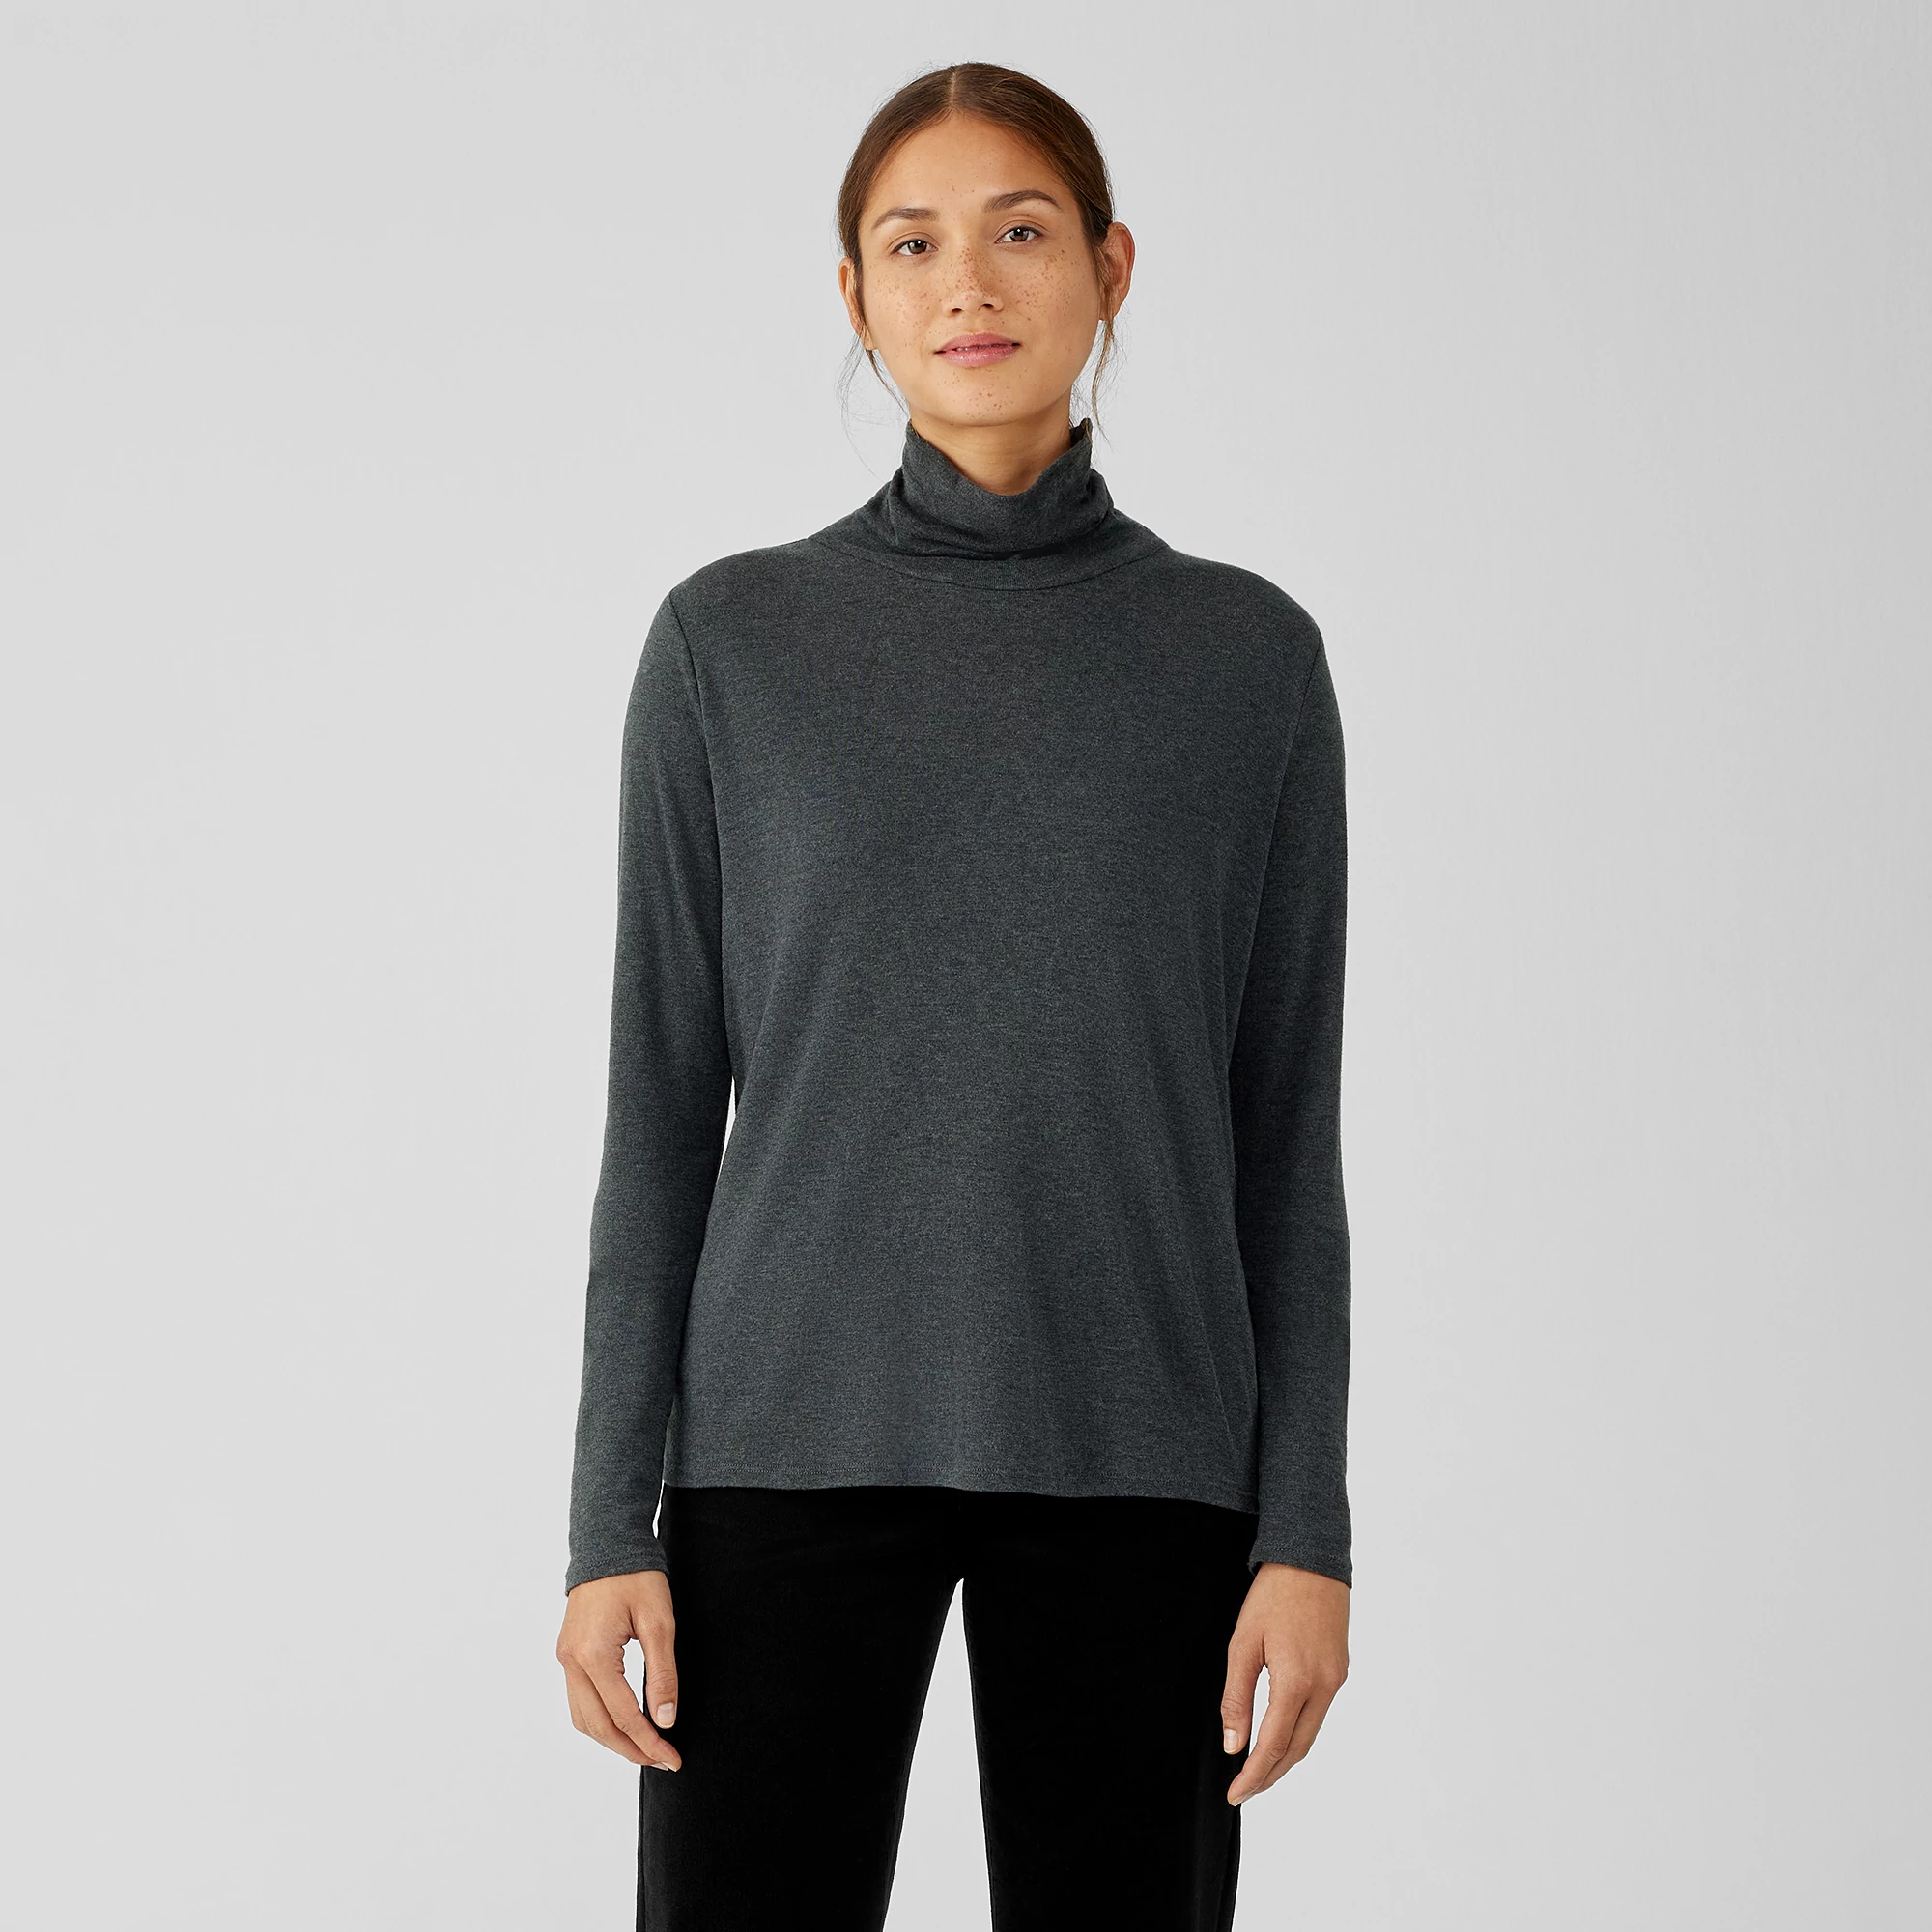 Organic Merino Wool DILLING Womens Long Sleeve top with high Neck and Zip 